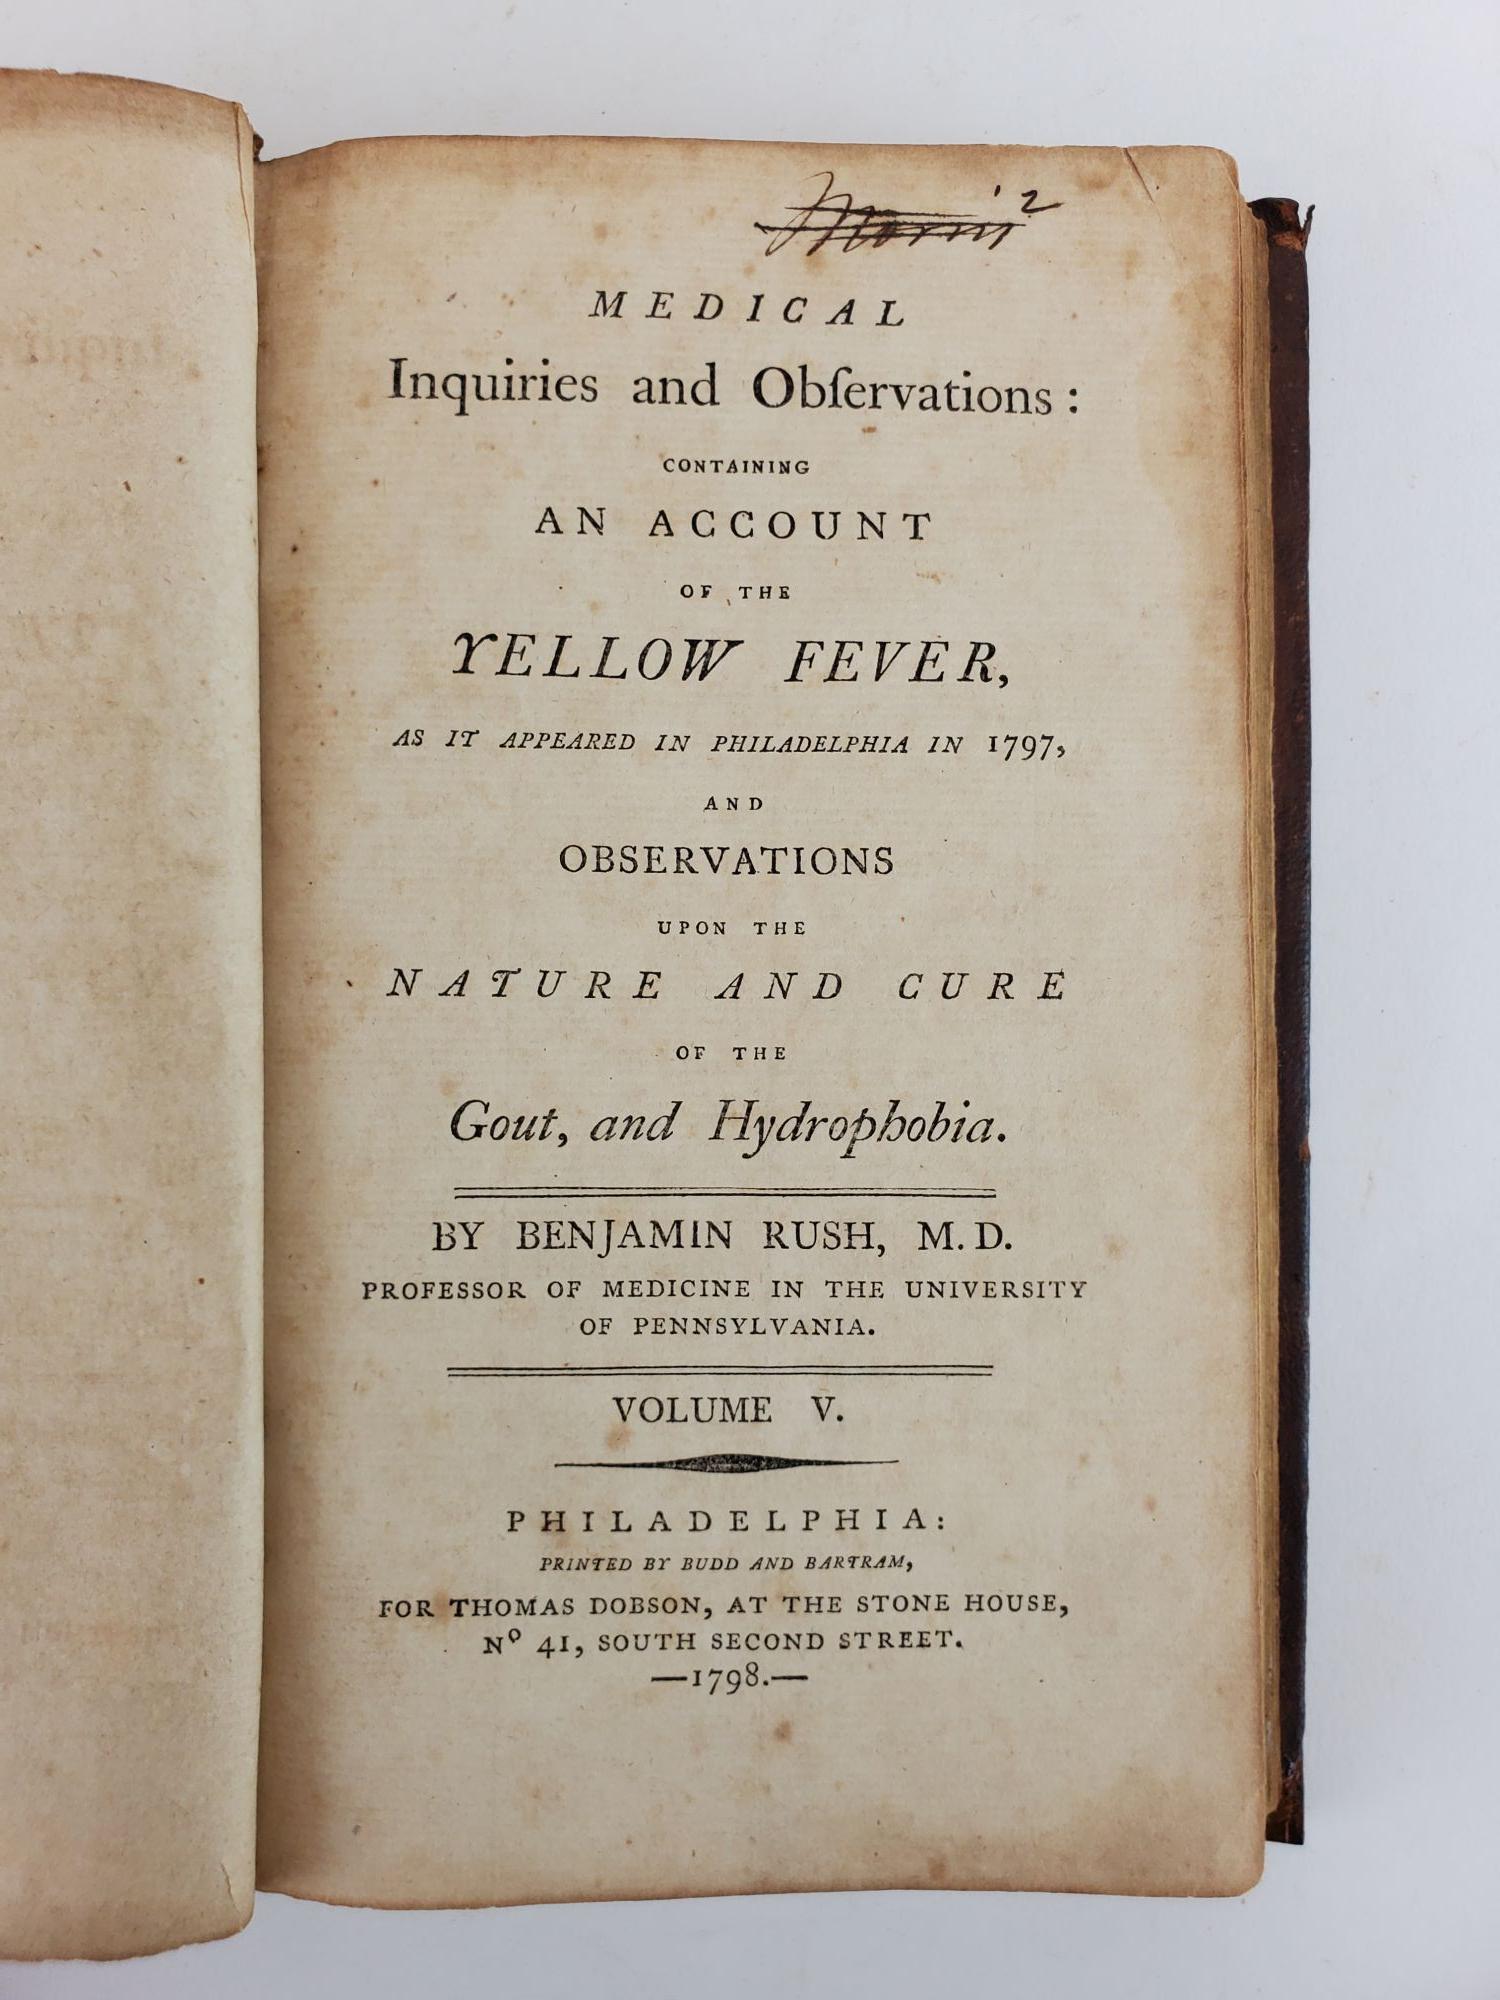 Product Image for MEDICAL INQUIRIES AND OBSERVATIONS CONTAINING AN ACCOUNT OF THE YELLOW FEVER, AS IT APPEARED IN PHILADELPHIA IN 1797, AND OBSERVATIONS UPON THE NATURE AND CURE OF THE GOUT, AND HYDROPHOBIA (Volume Five Only)